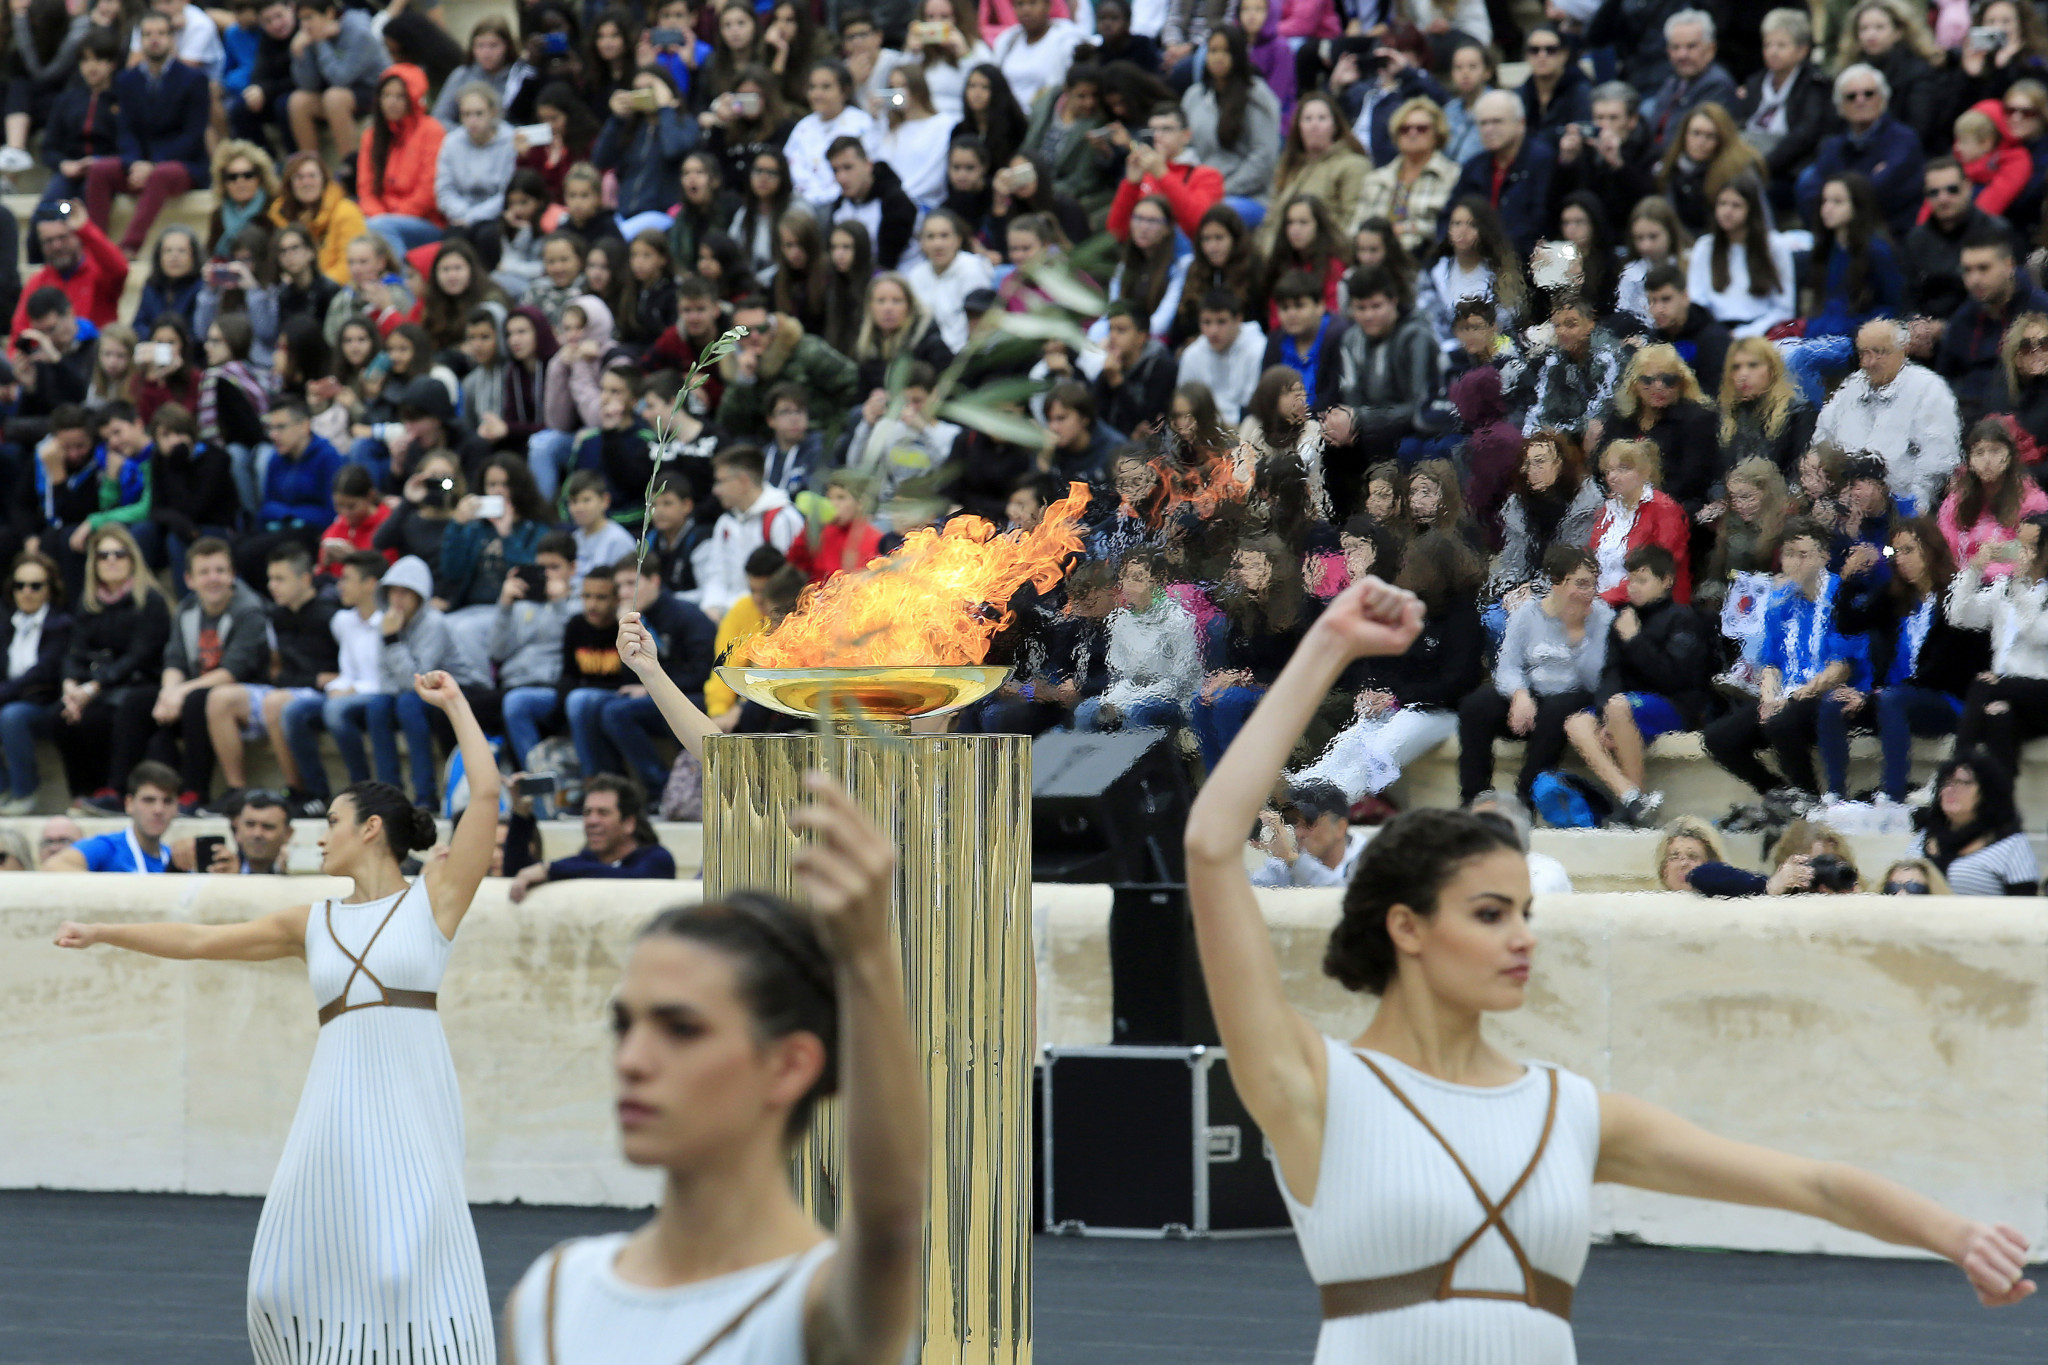 ‘’Let Everyone Shine’’ The 2018 torch song made its Olympic and international debut in the historic Panathinaiko Stadium in Athens ©Getty Images